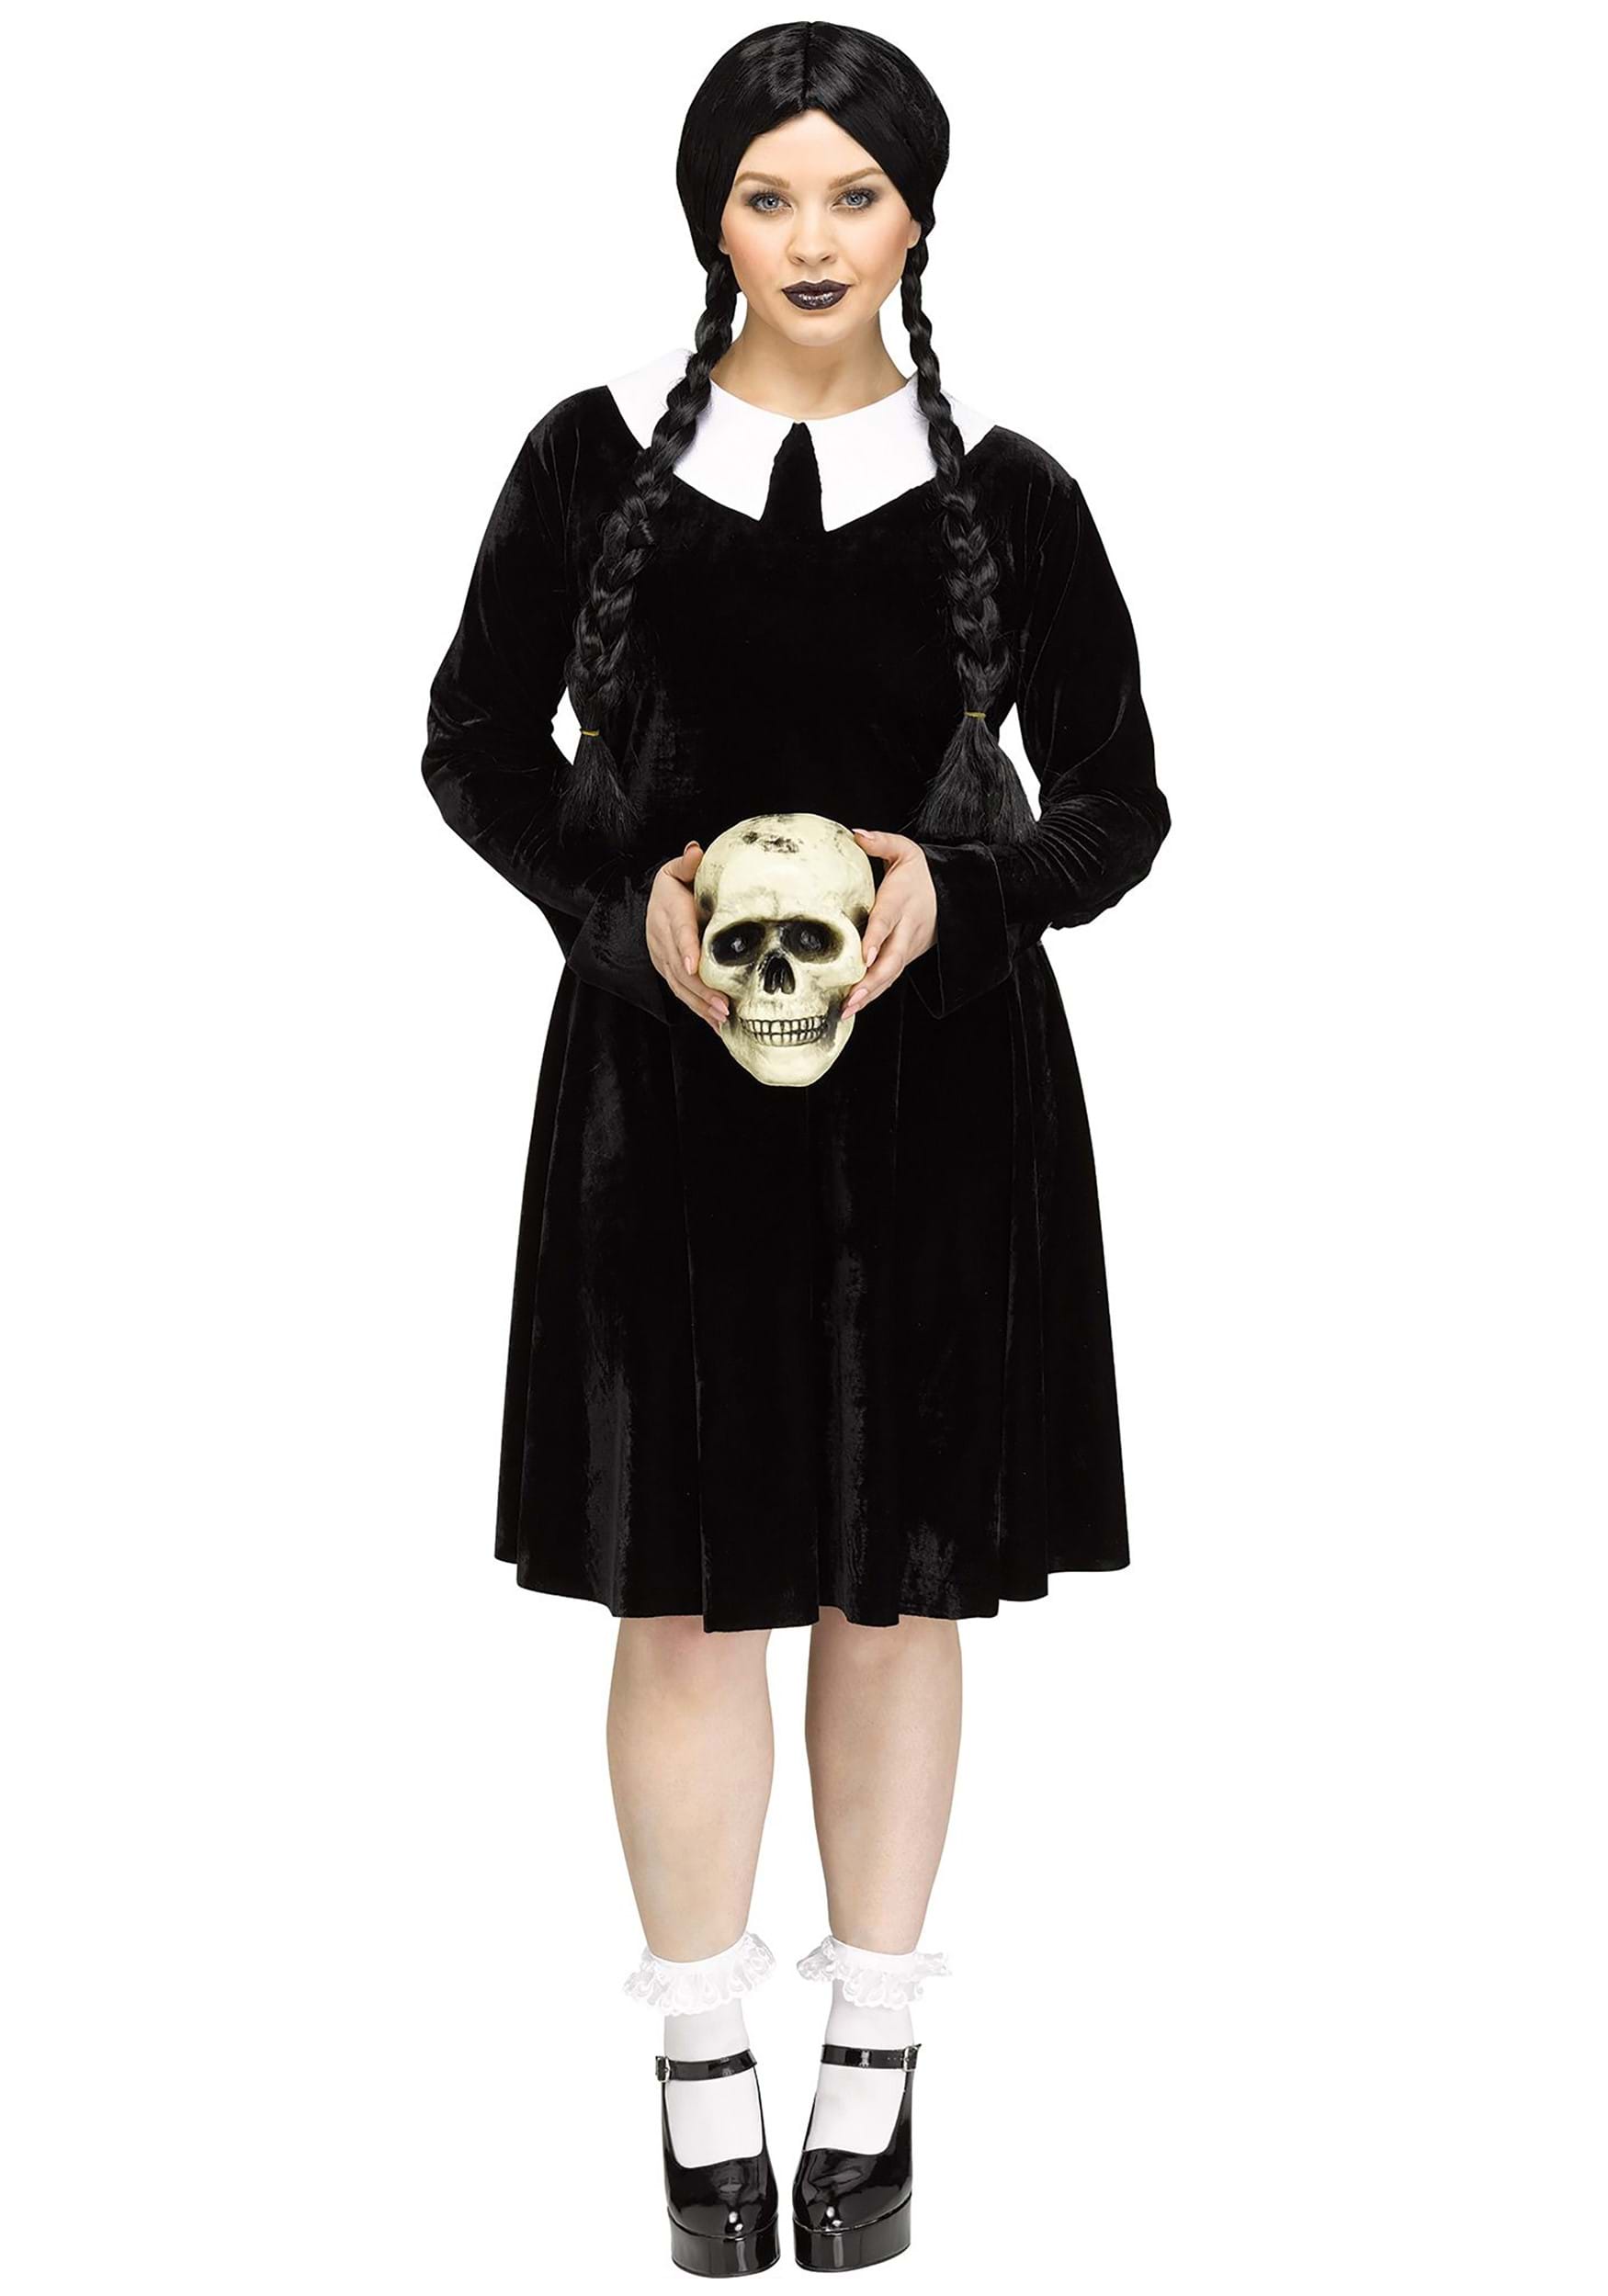 https://images.fun.com/products/72758/1-1/womens-plus-size-gothic-girl-costume-dress.jpg